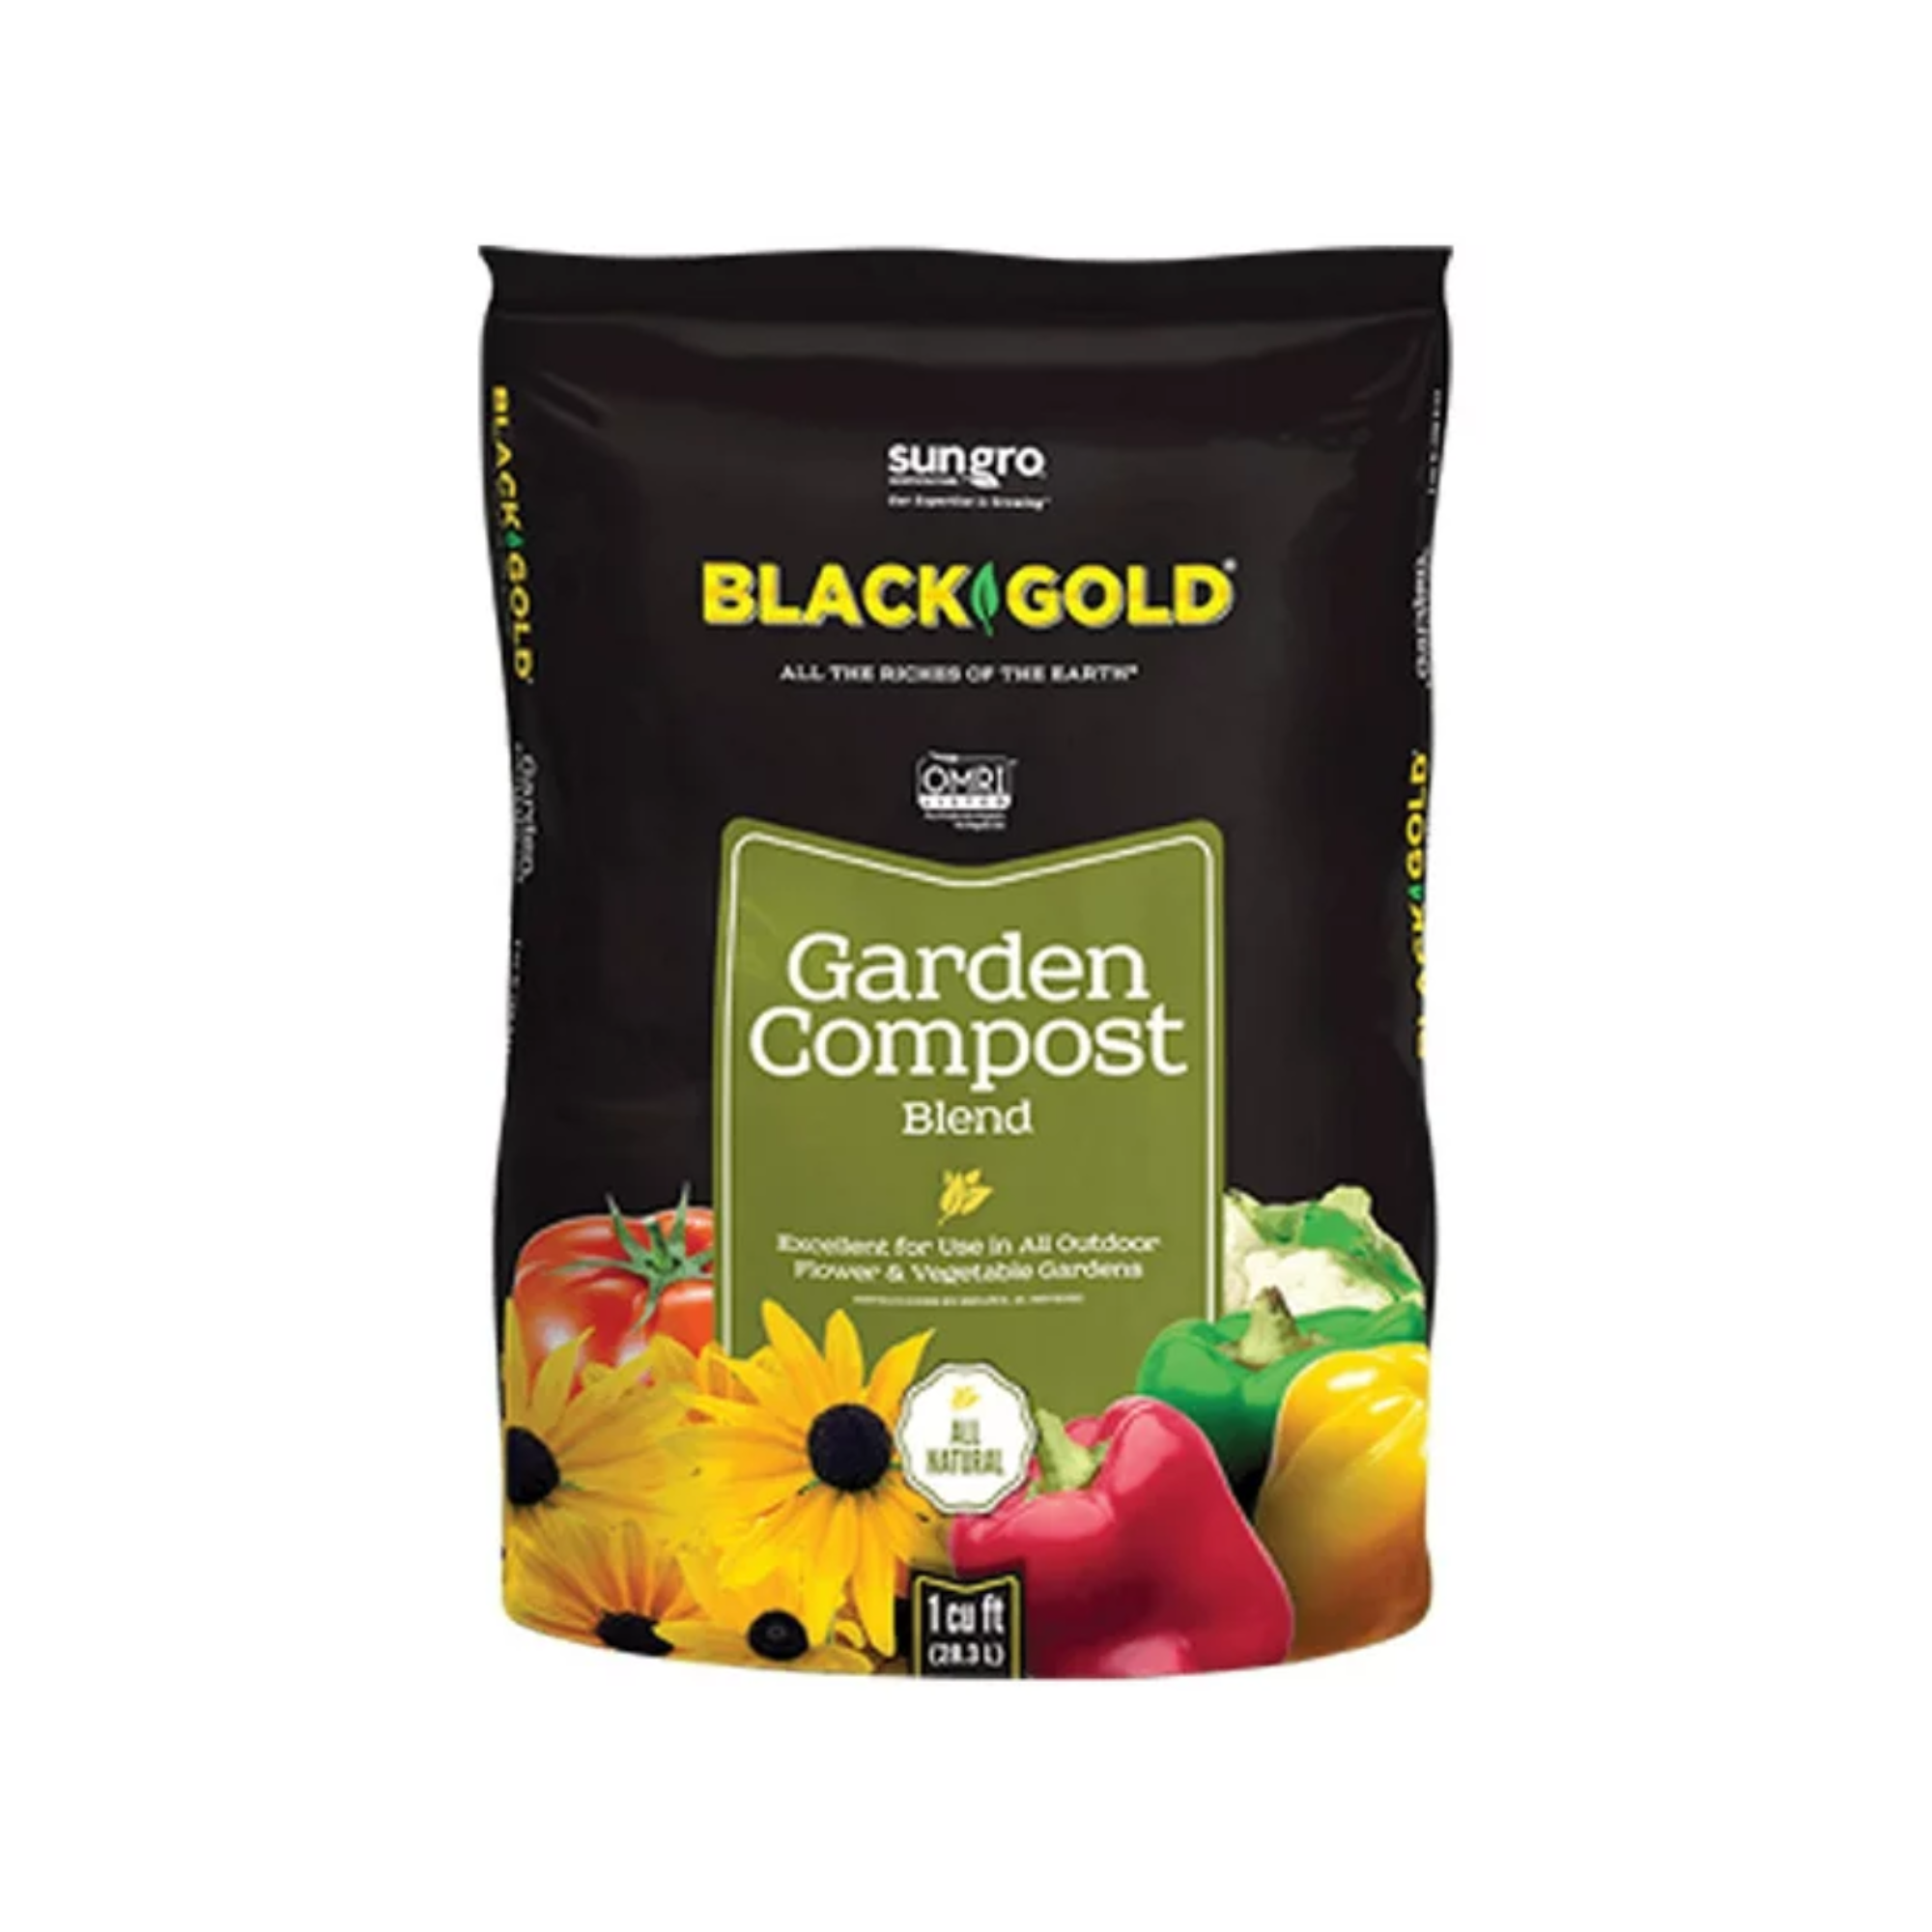 A pack of garden compost